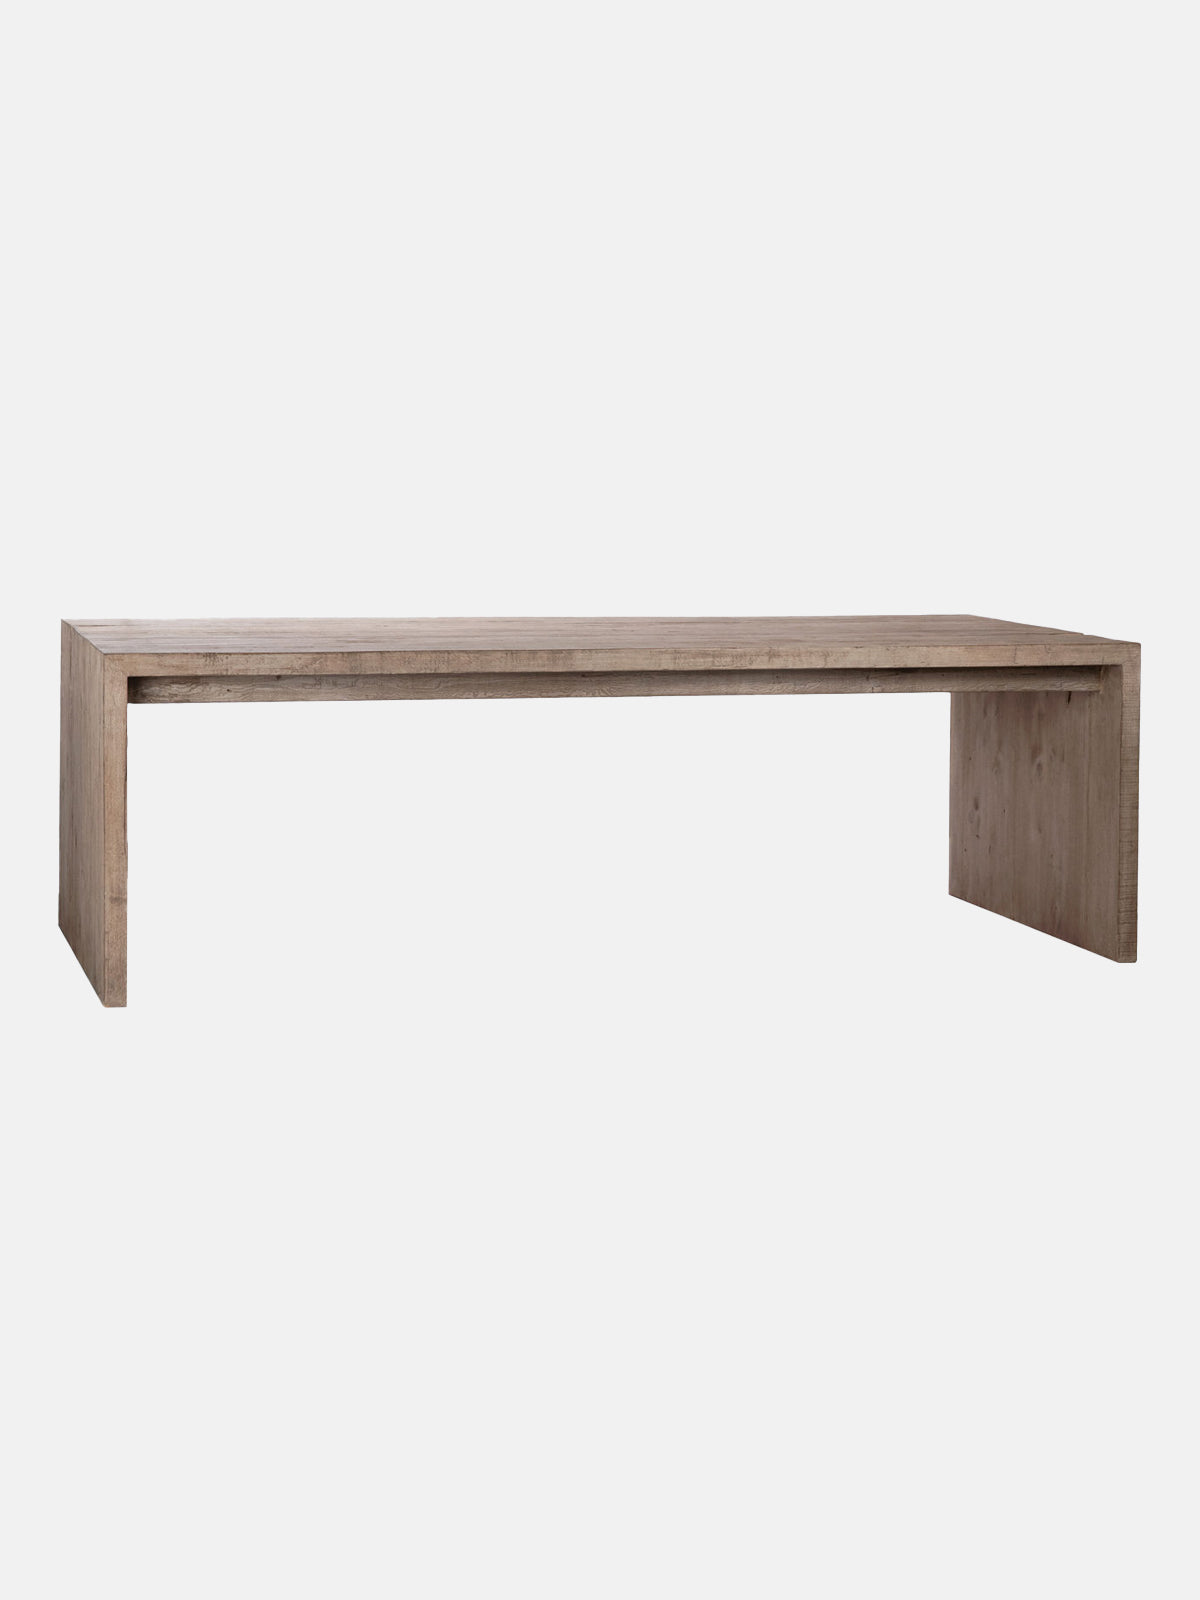 Merwin Dining Table